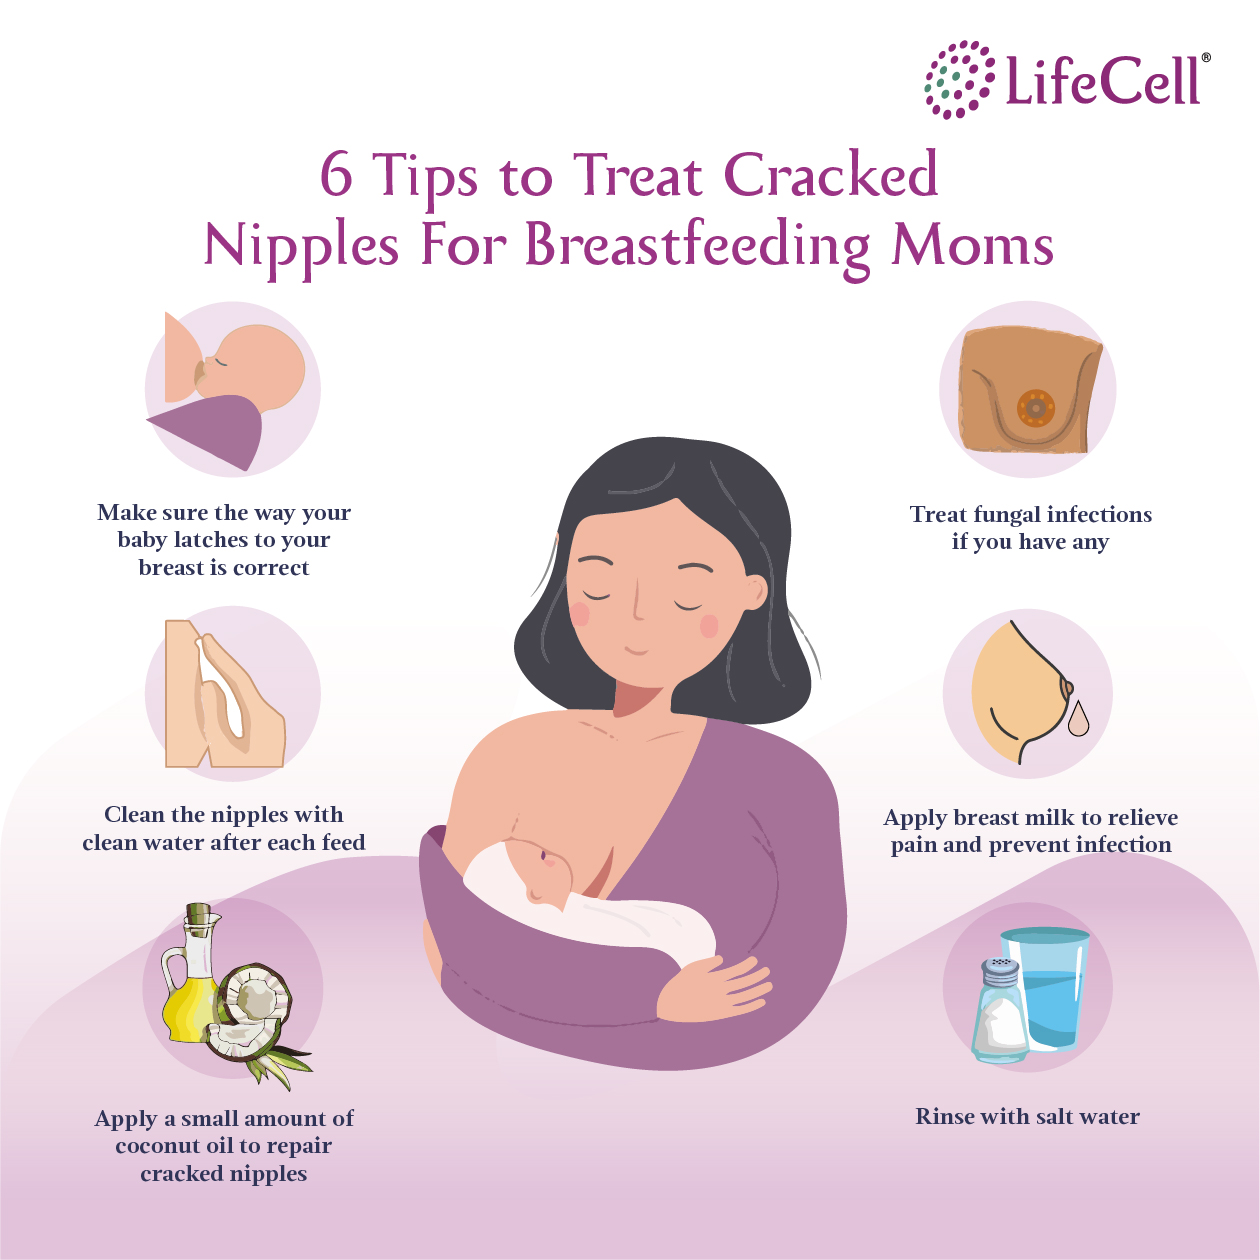 How to soothe sore nipples when breastfeeding